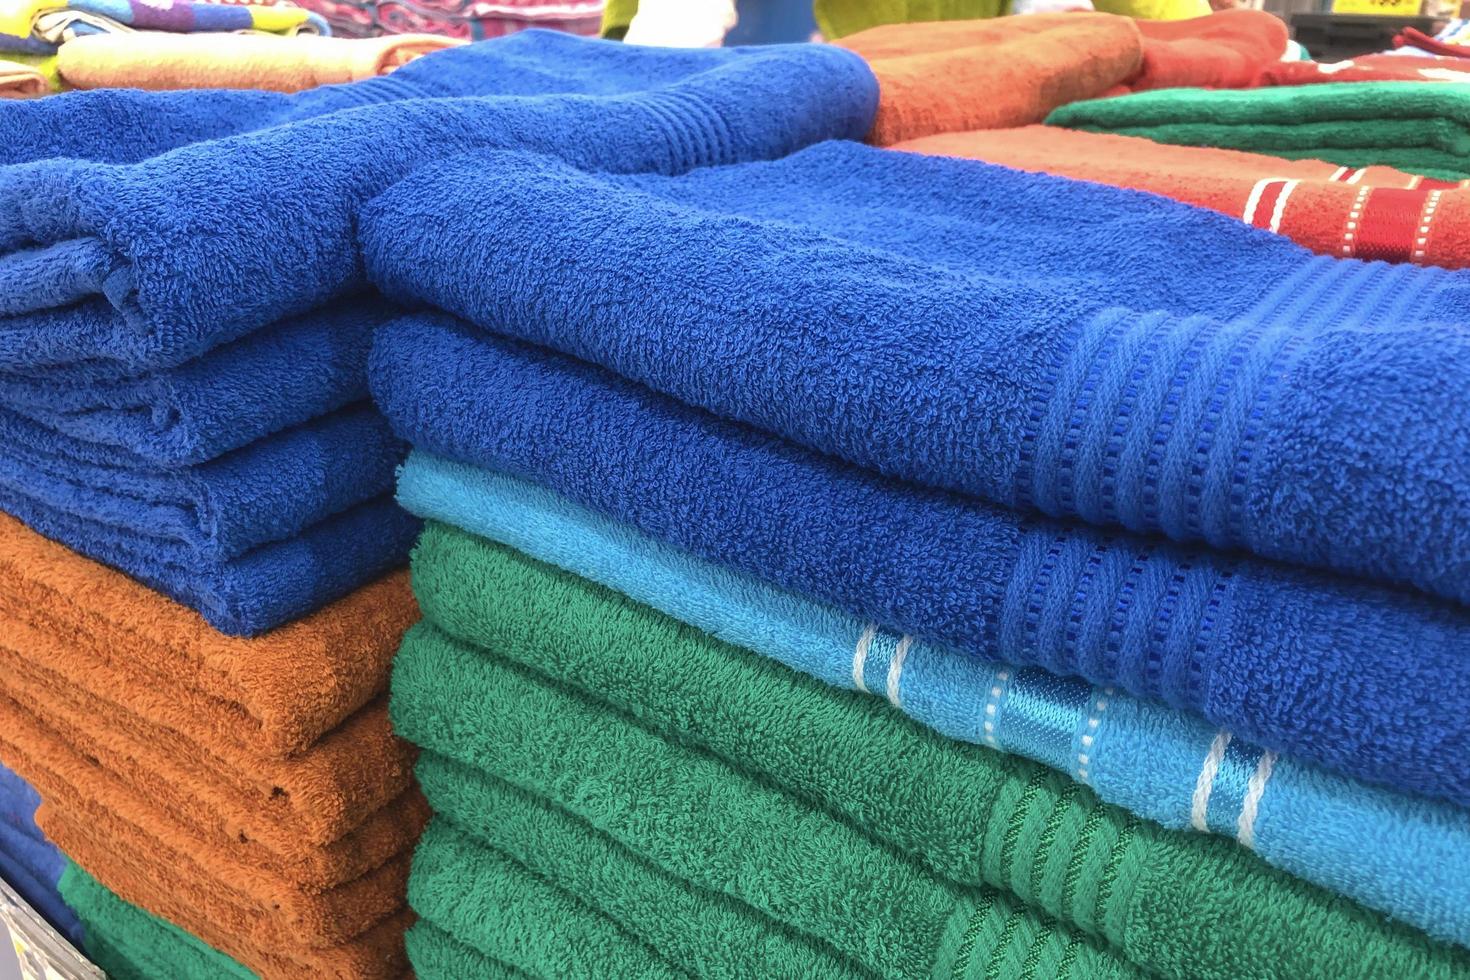 Folded towels for sale in the mall. photo